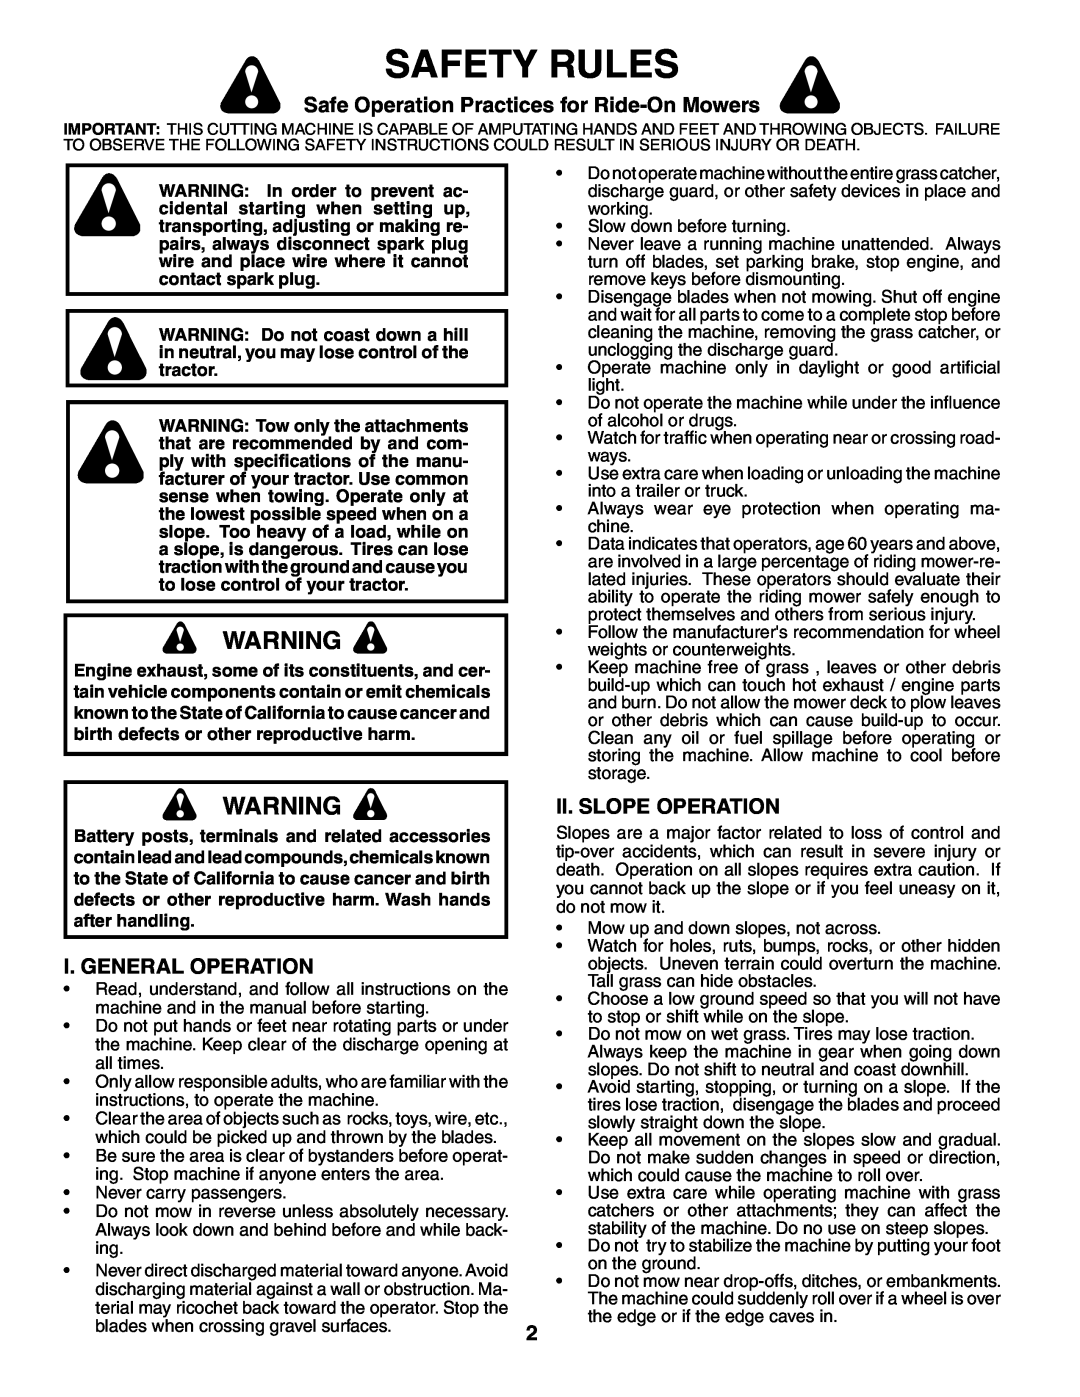 Poulan 195854 manual Safety Rules, Safe Operation Practices for Ride-OnMowers, I. General Operation, Ii. Slope Operation 